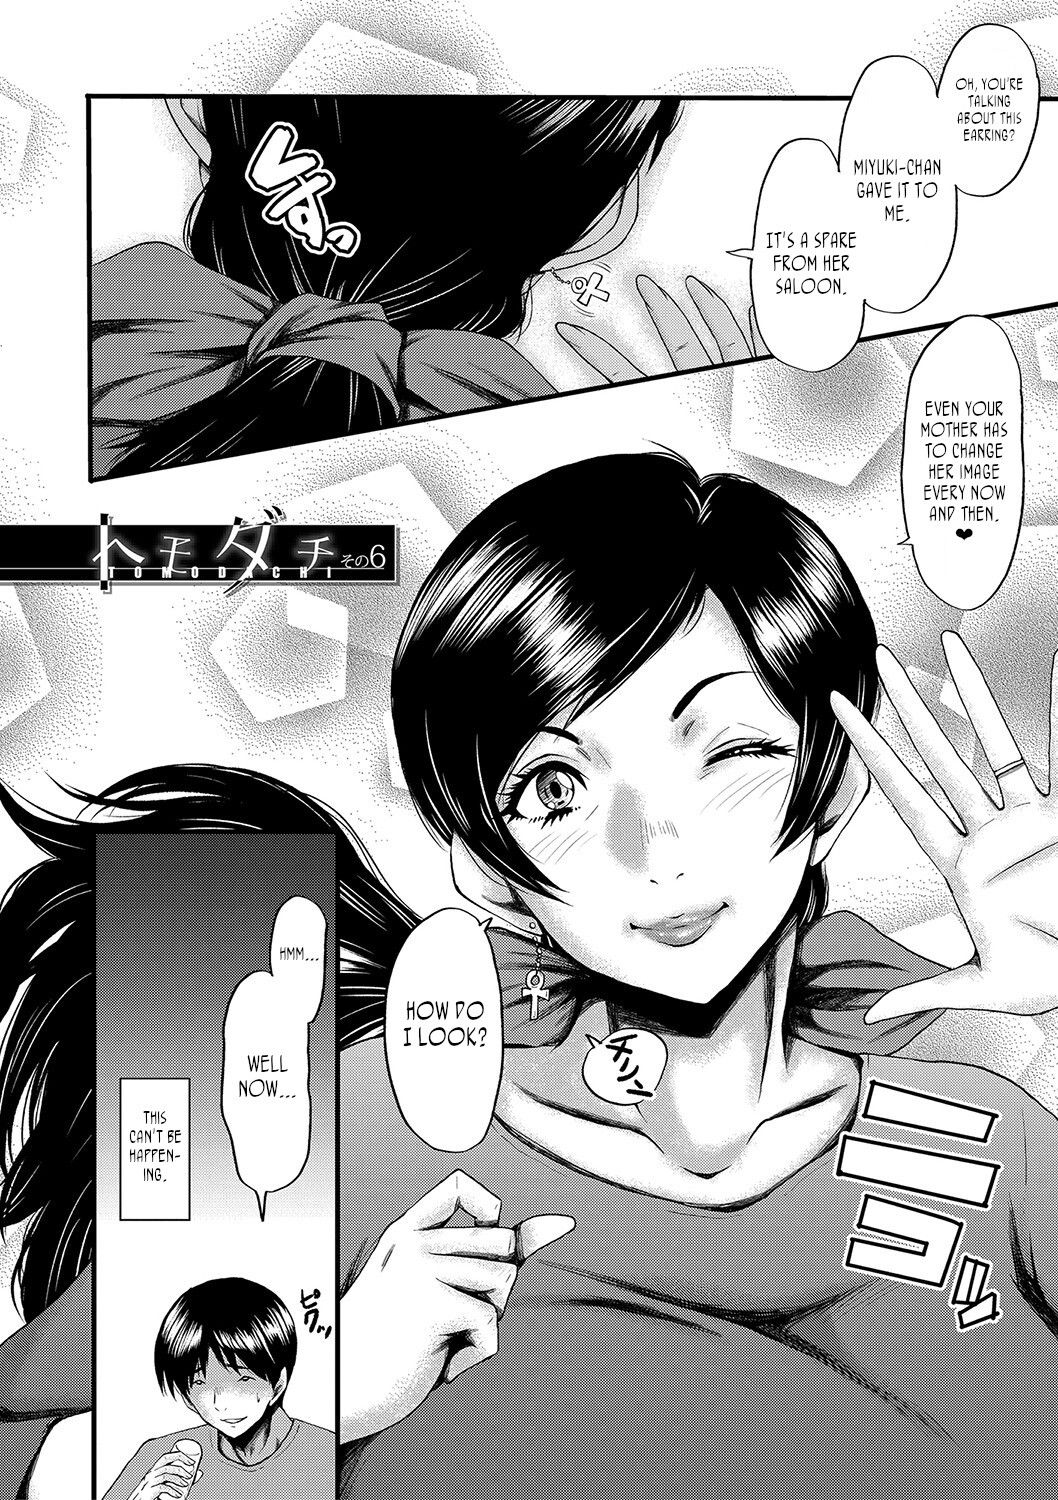 Hentai Manga Comic-My friend stole away both my childhood friend and my mother-Chapter 6-2